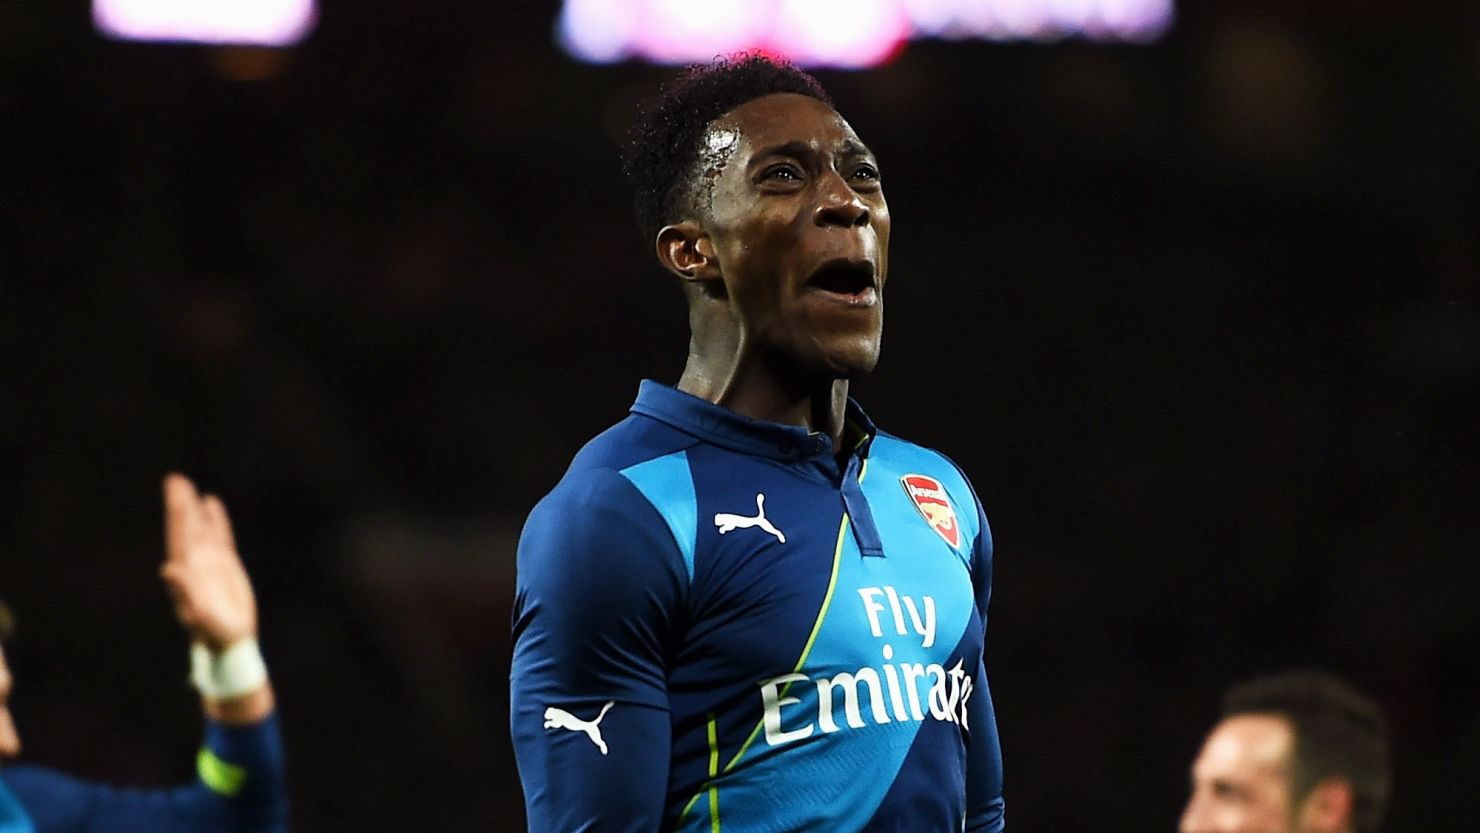 Danny Welbeck celebrates is winning goal for Arsenal in the FA Cup quarterfinal tie at Manchester United.